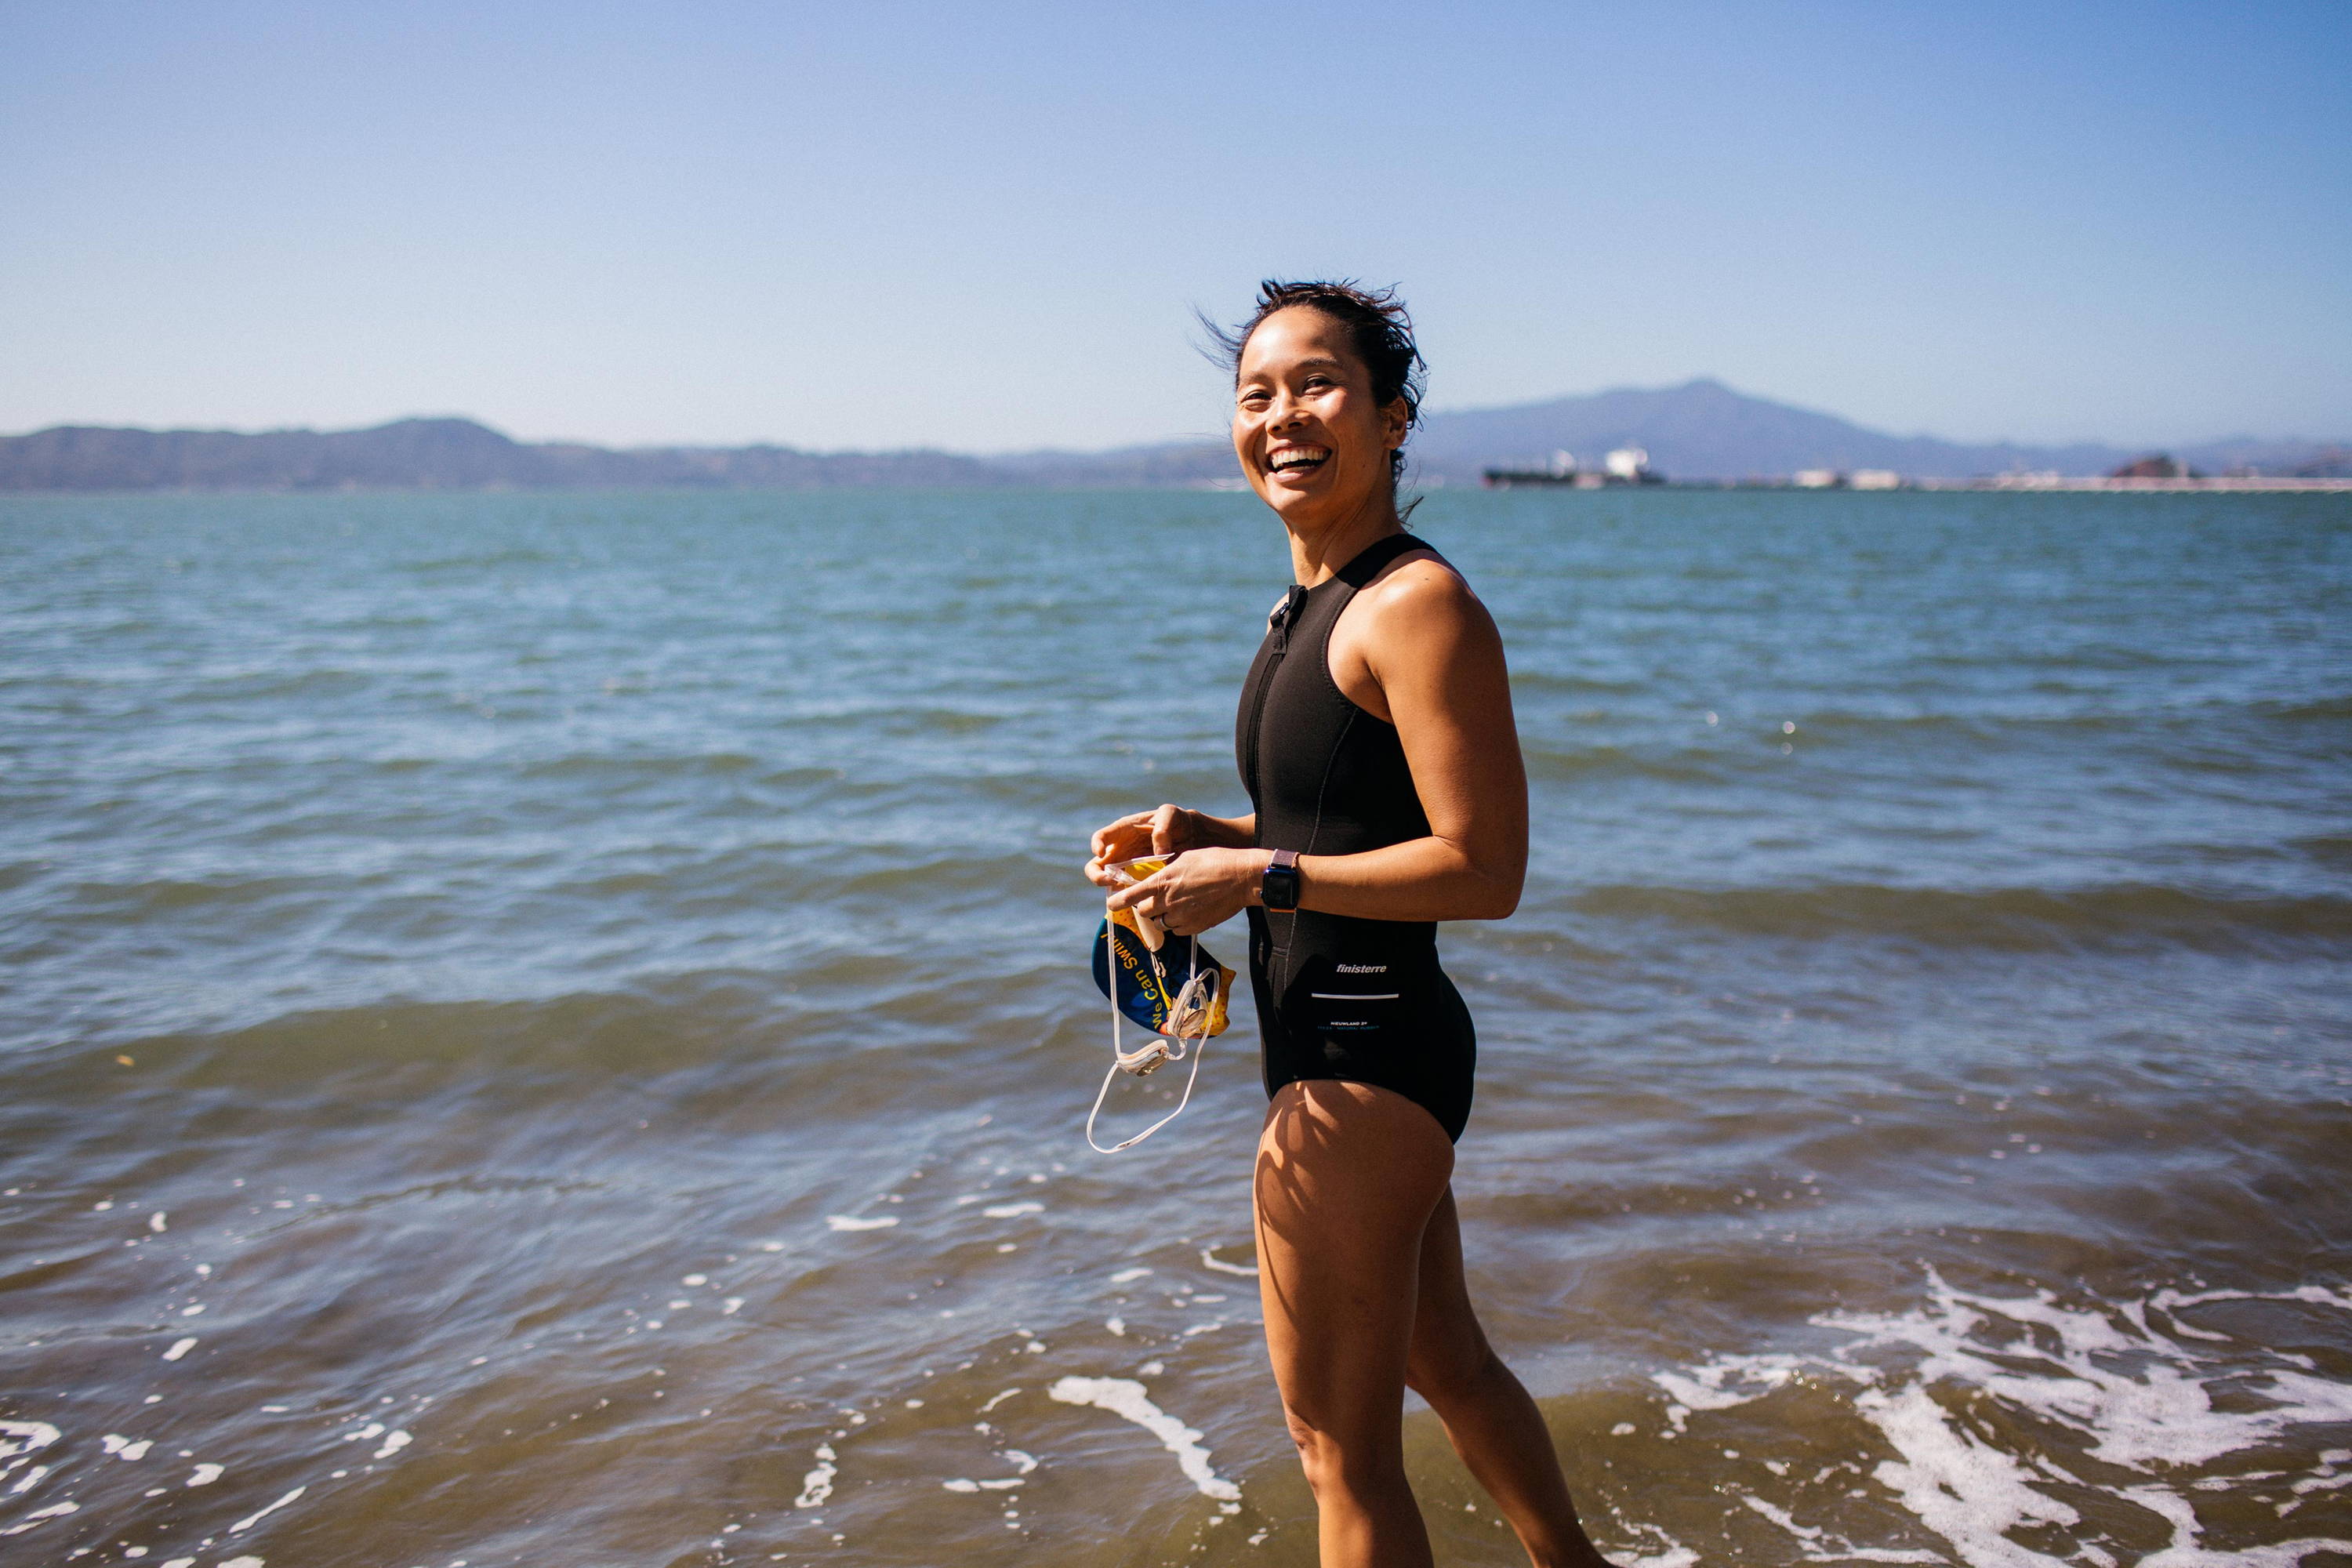 The Author, Bonnie Tsui, Preparing to enter the waters of San Francisco Bay